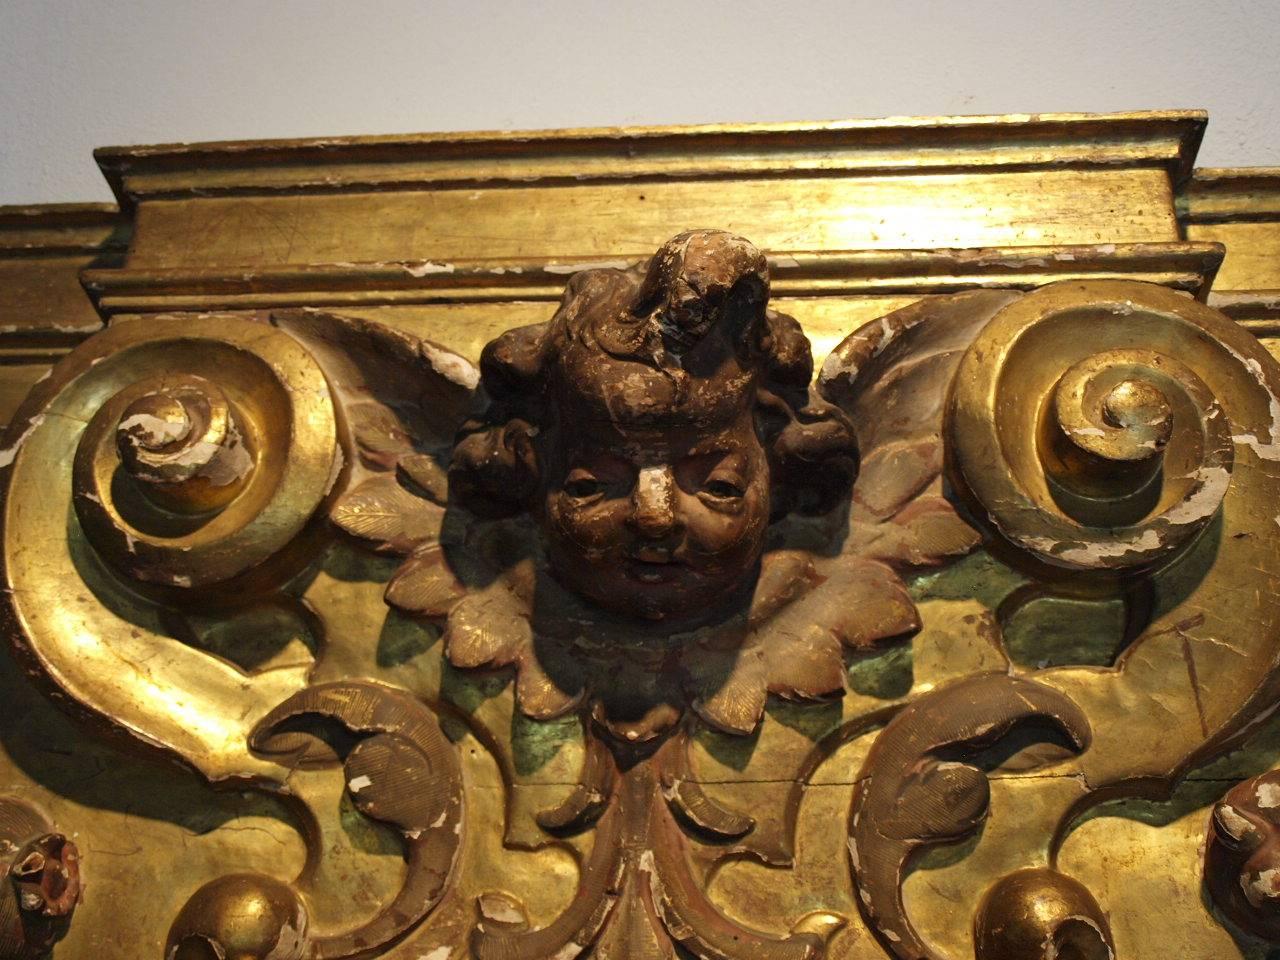 A stunning 18th century boiseries fragment from the Veneto region of Italy. Beautifully crafted from carved wood, polychromed and gilded. the motif is of a delightful Putto or Angel with pomegranates. Magnificent incorporated into an interior or as